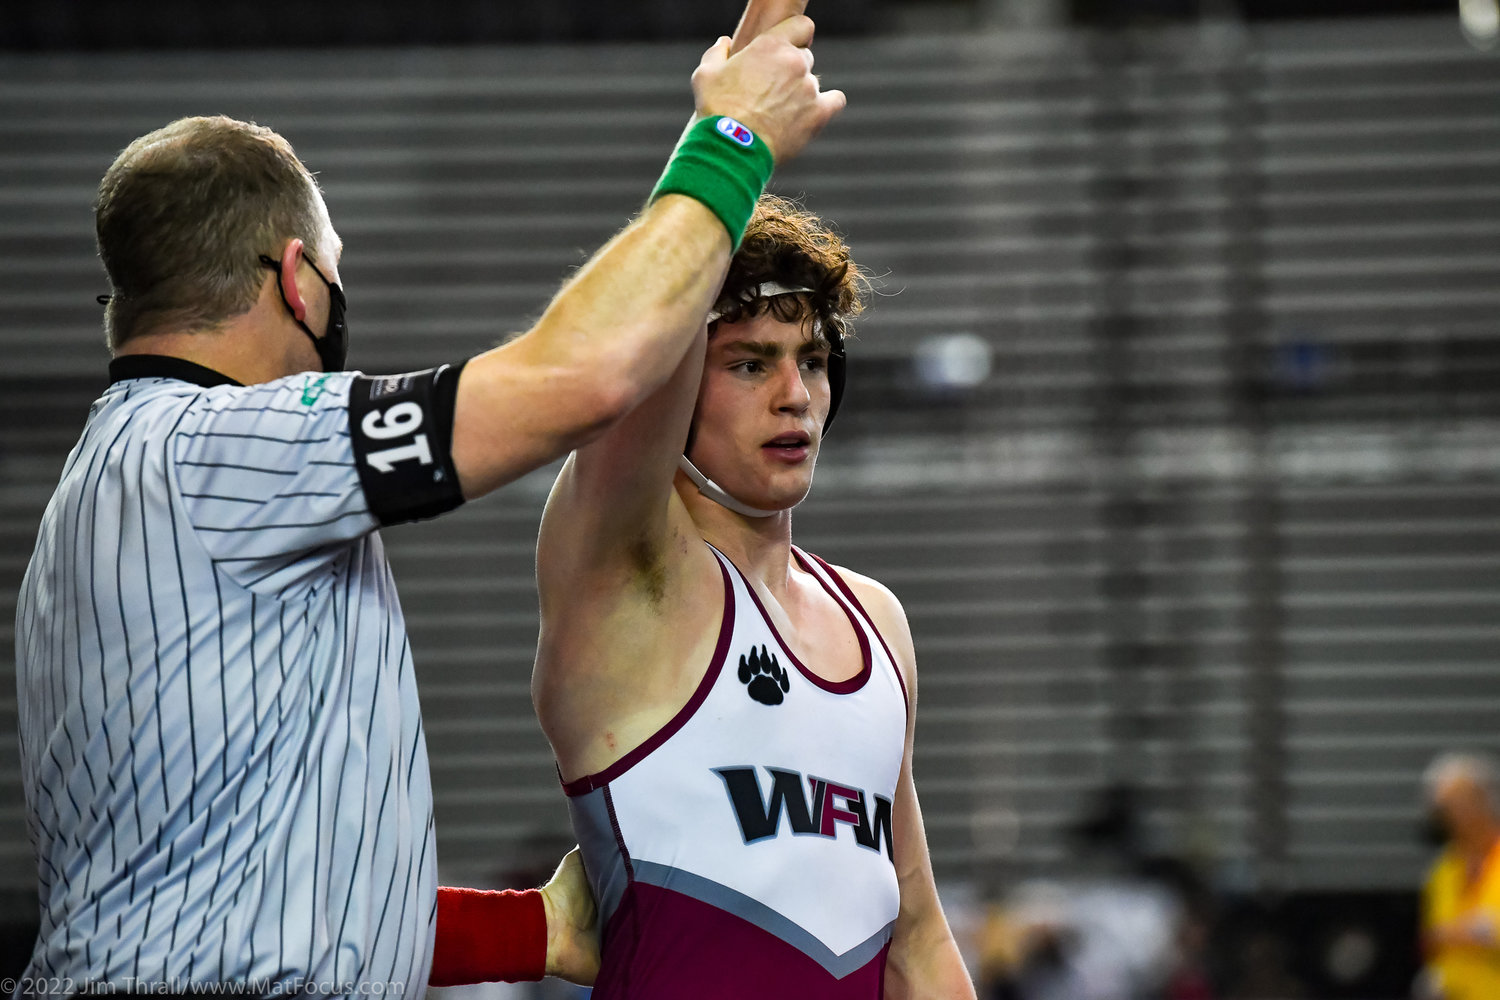 A W.F. West wrestler raises his hand in victory at Mat Classic XXXIII at the Tacoma Dome on Friday.